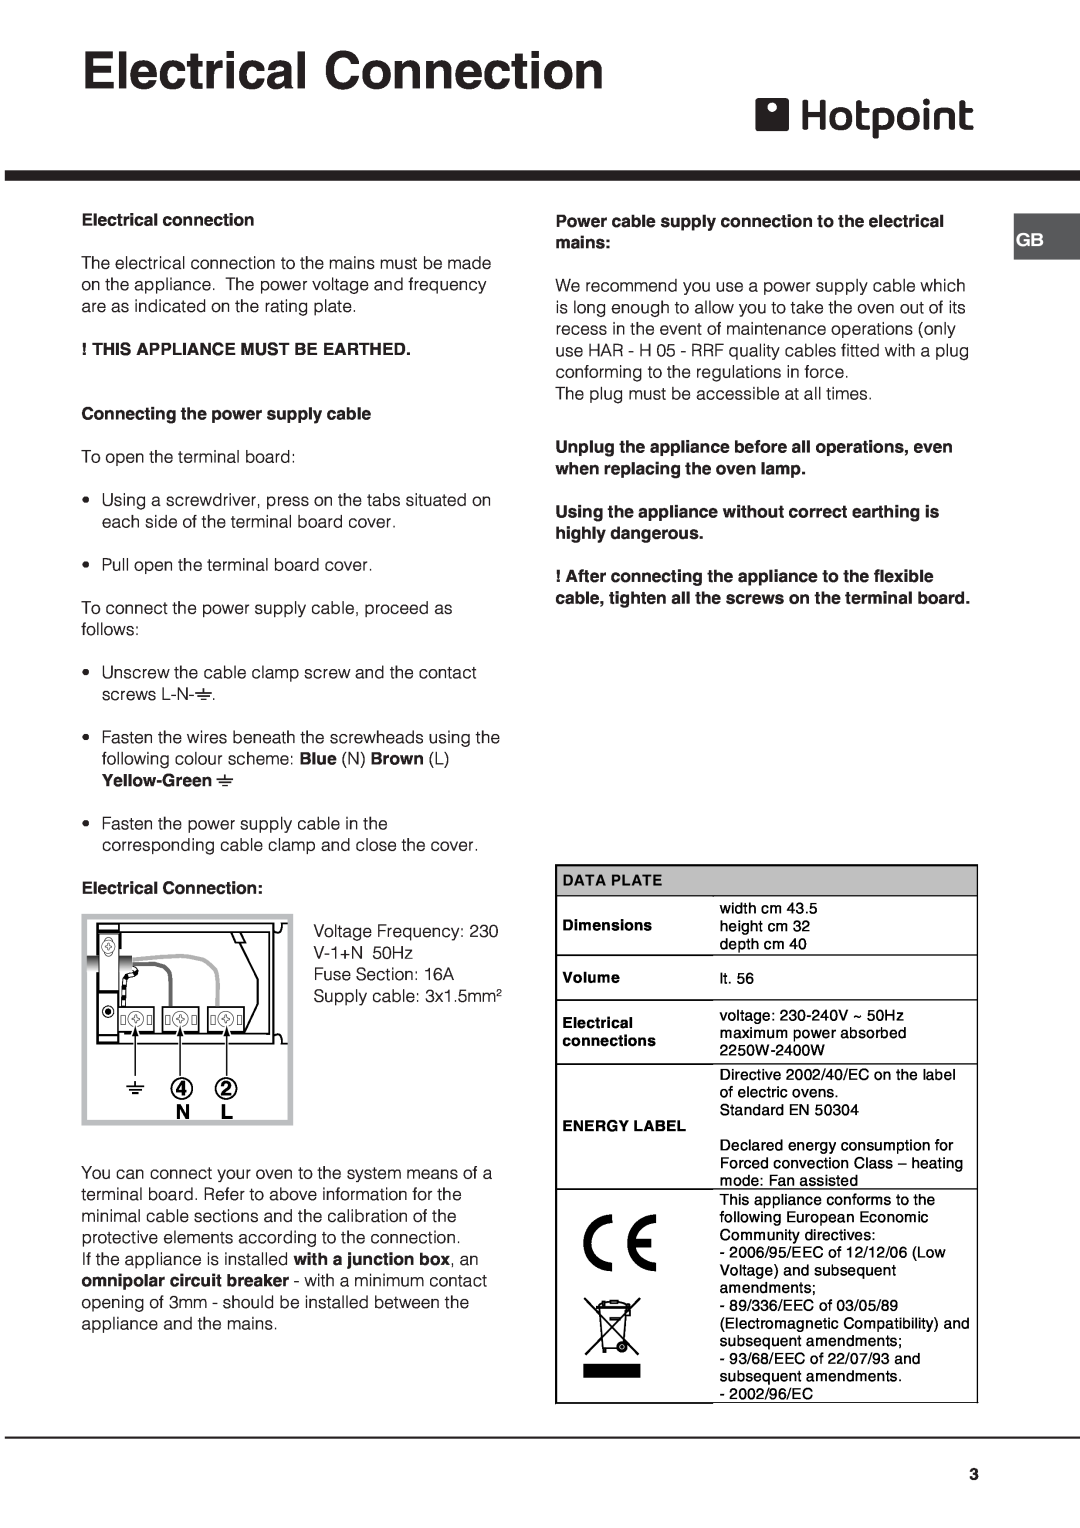 Hotpoint BS53X1 operating instructions Electrical Connection, 4 2 N L 